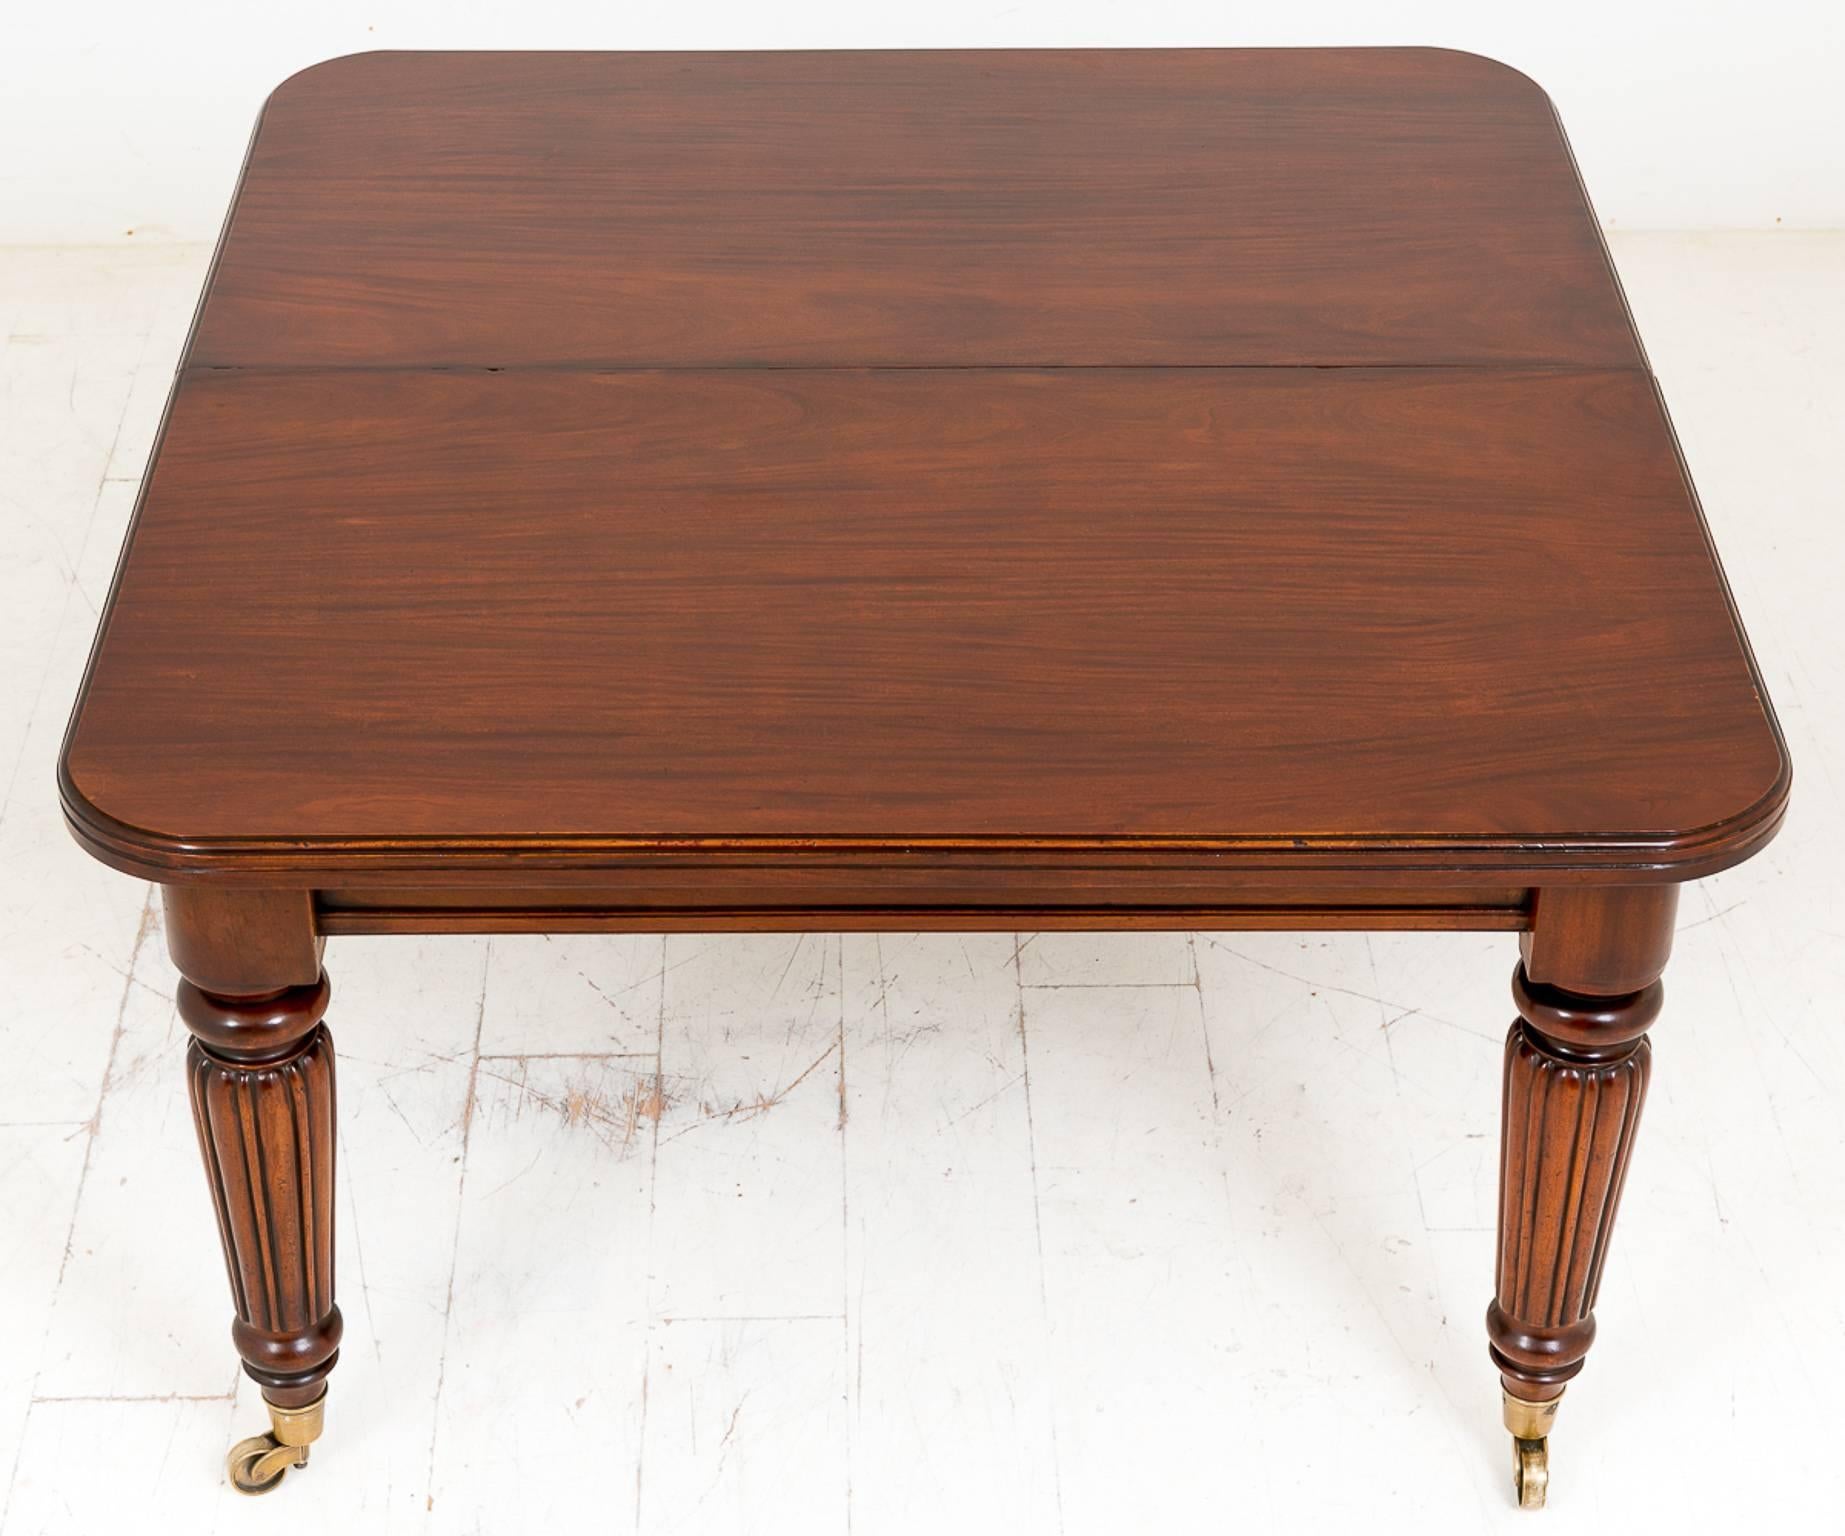 Mid-Victorian mahogany extending dining tale, standing on large brass castors with a turned and fluted leg.
This table features three extra leaves making this a very versatile table.
Comes with a wind out mechanism with a rather nice makers plaque